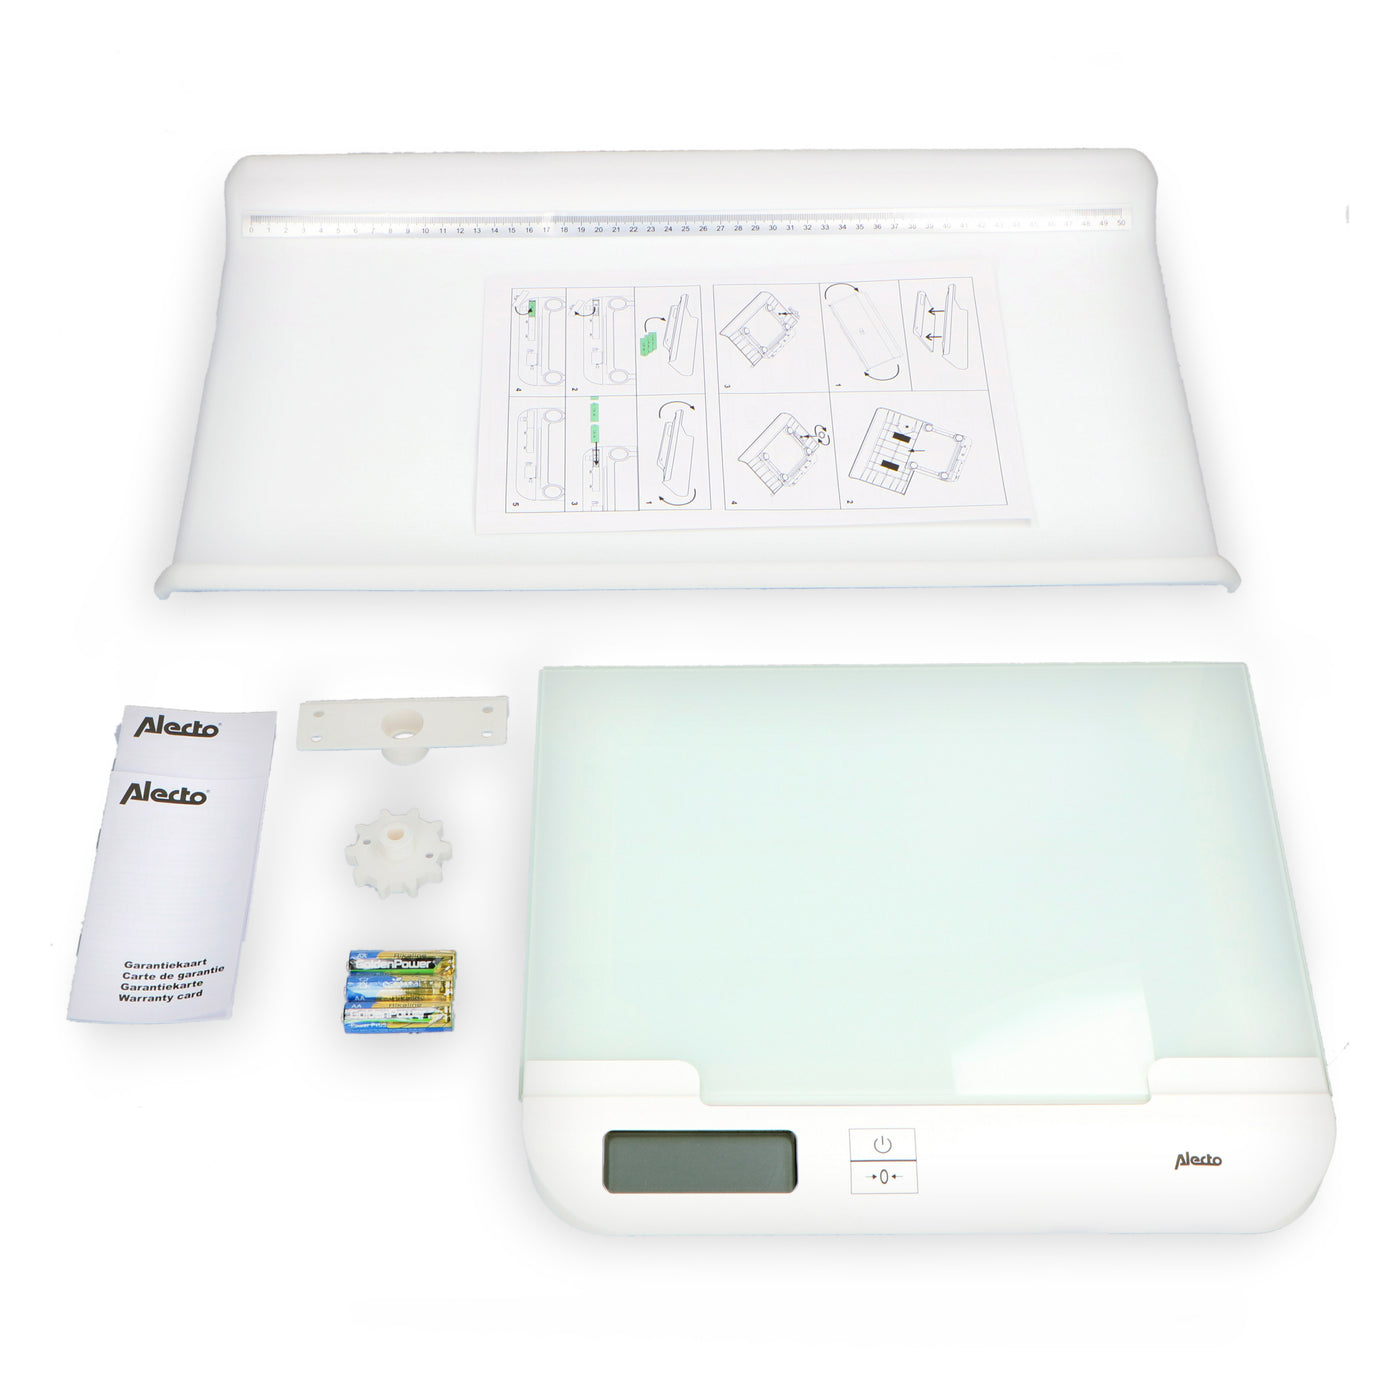 Alecto BC-10 - Baby and toddler scale, white